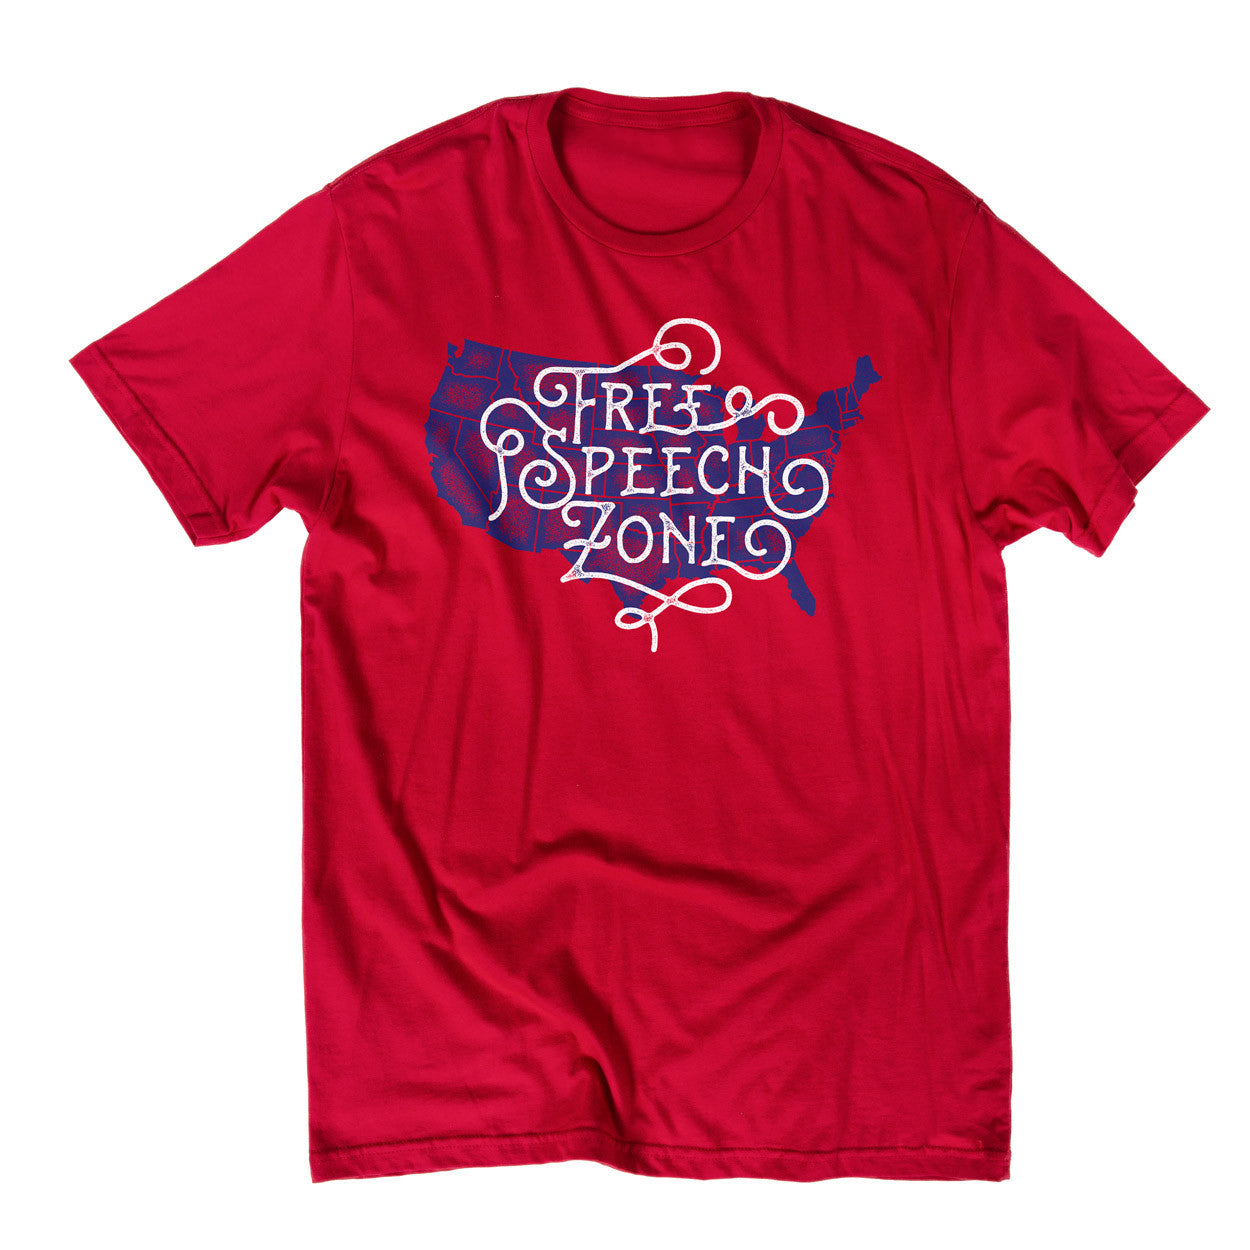 Free Speech Zone Red Graphic Tee by Liberty Maniacs